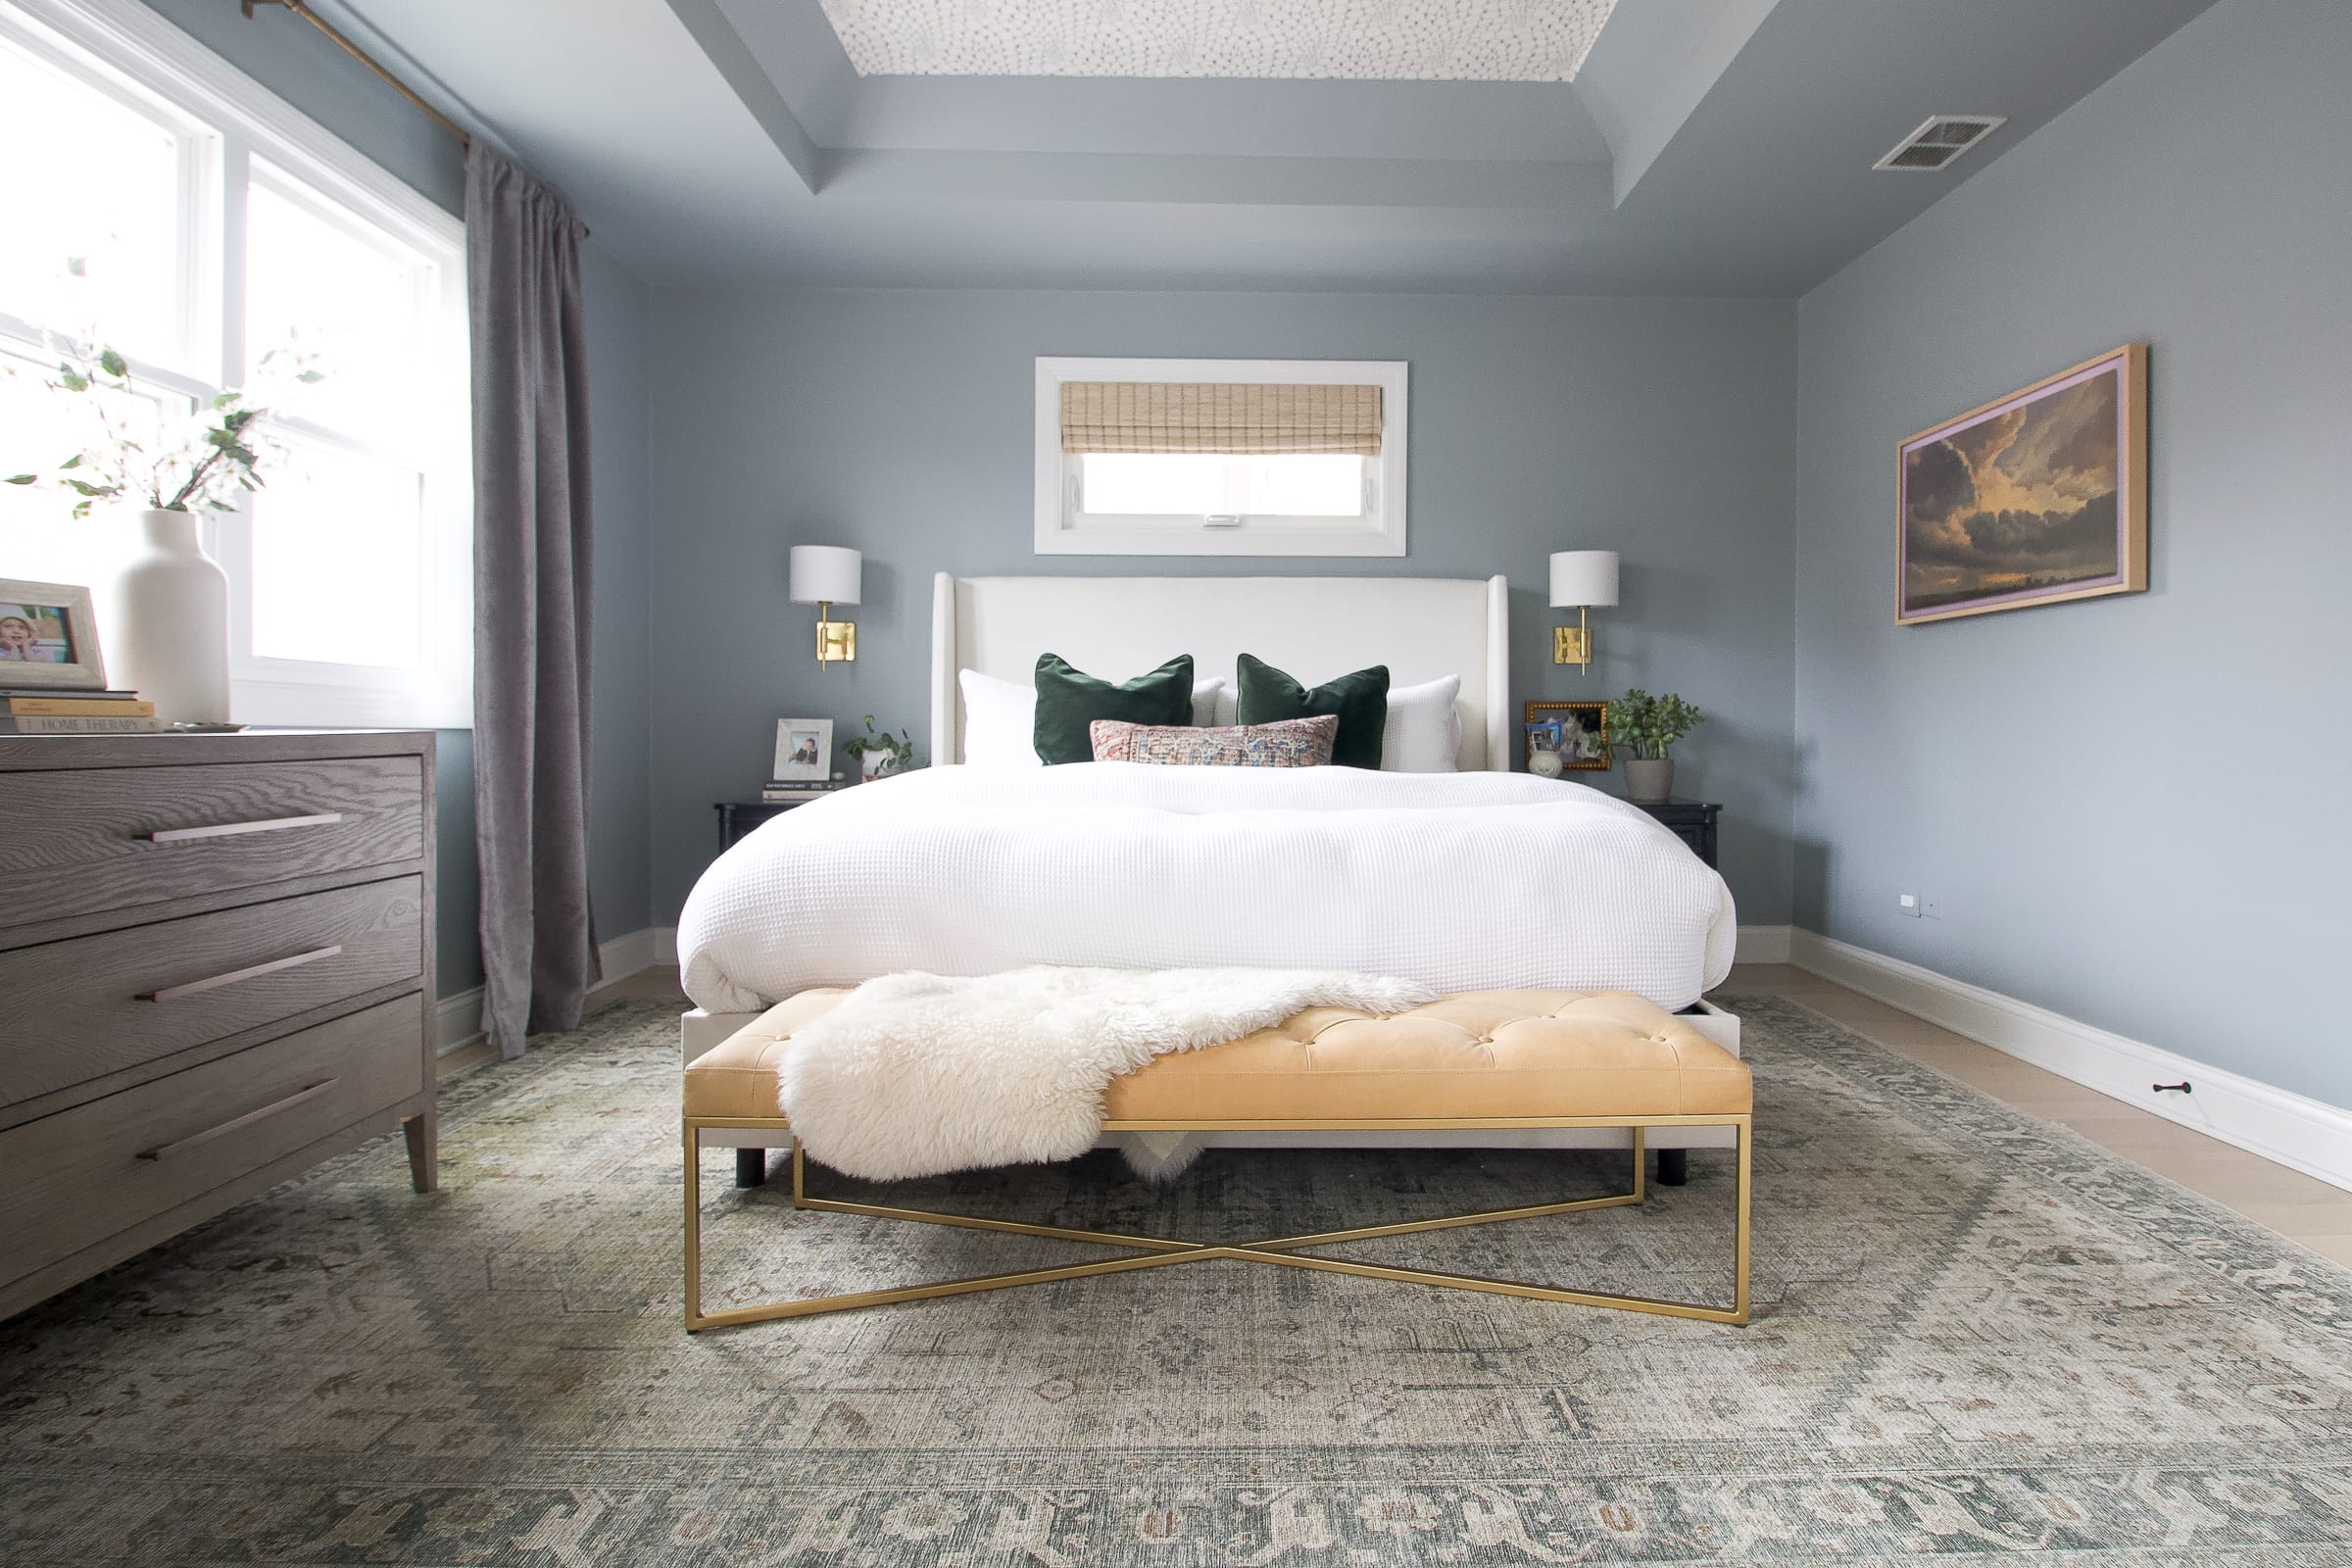 Our home's paint color palette. Using Boothbay Gray in the bedroom